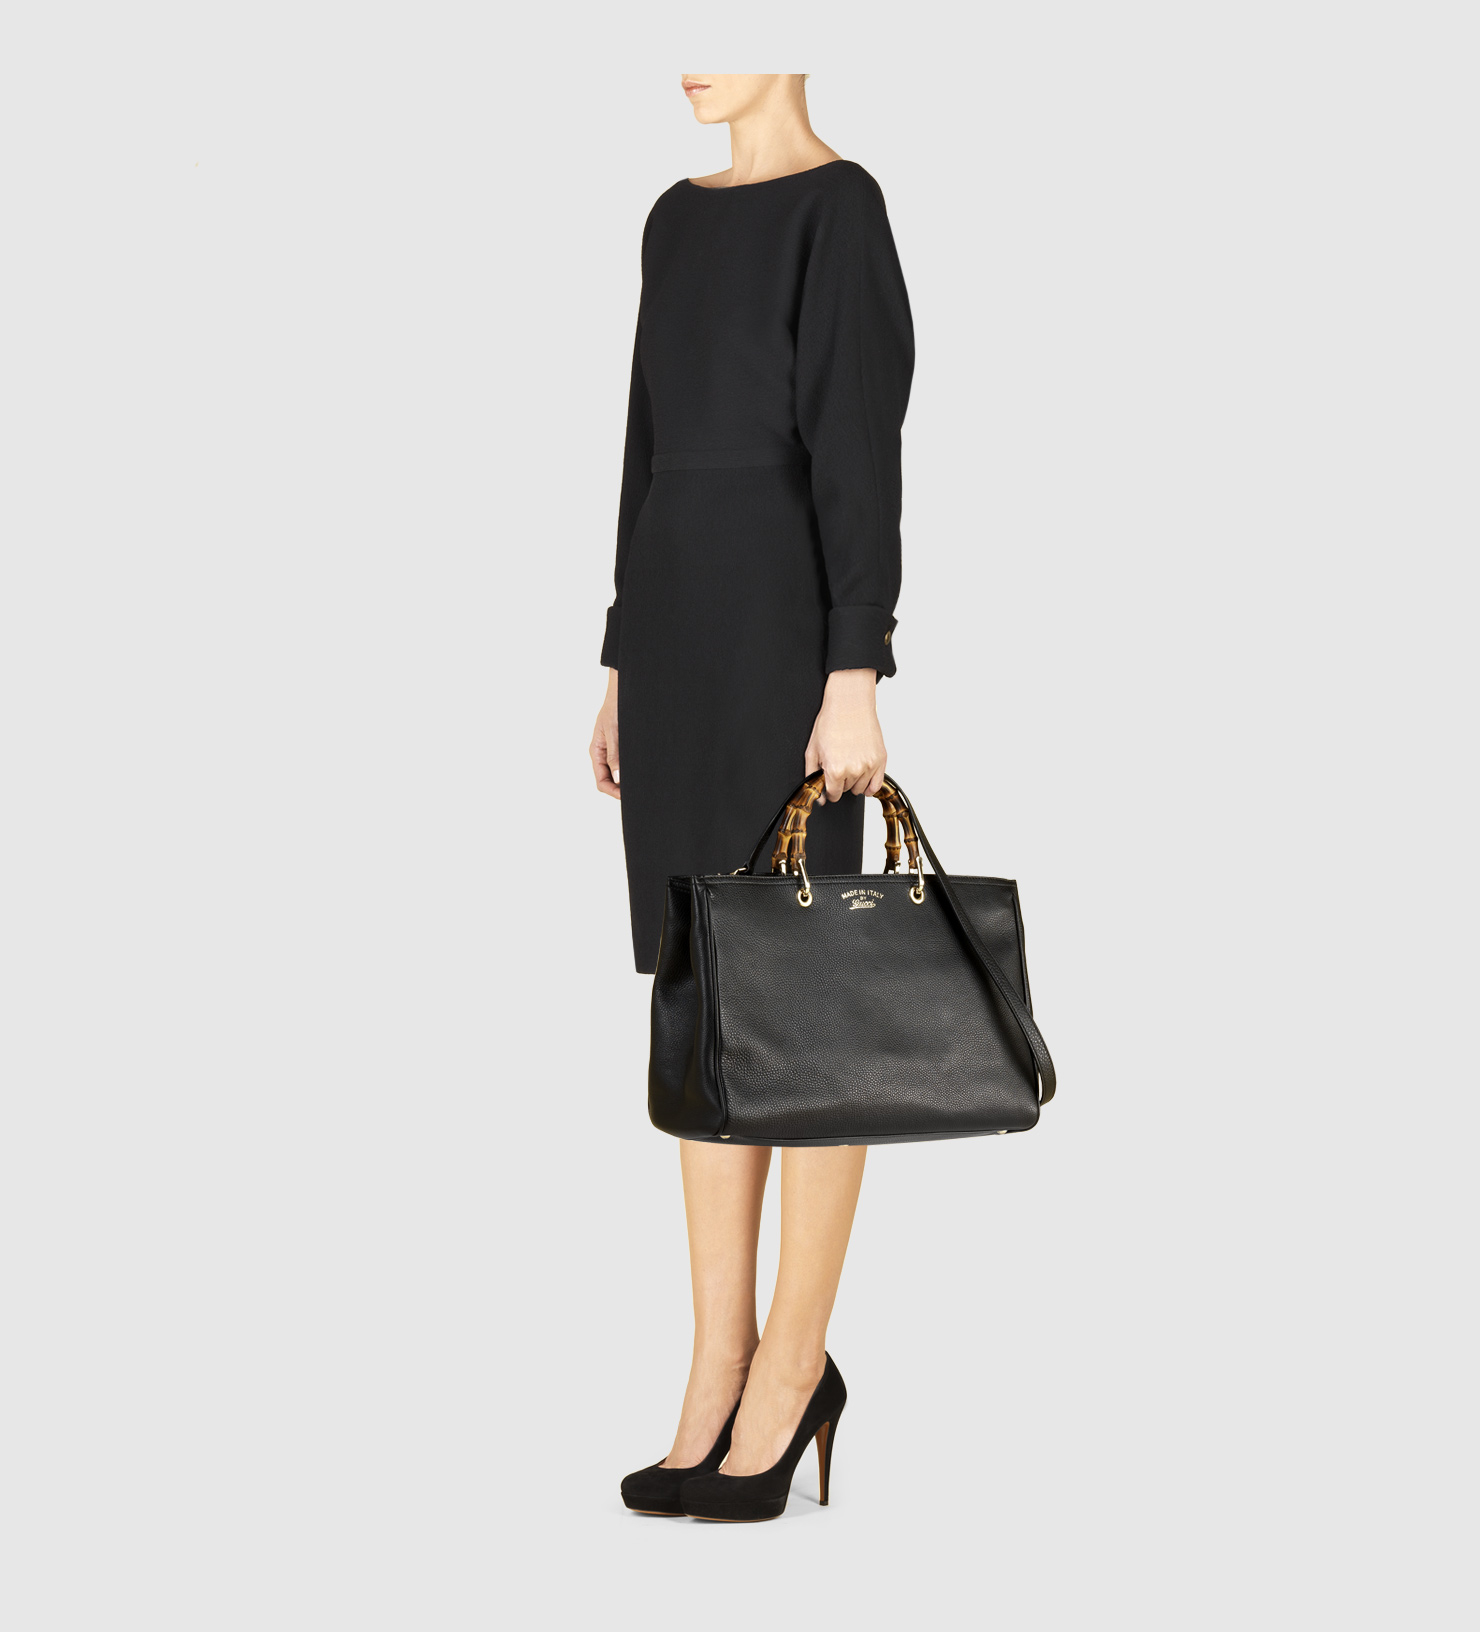 Lyst - Gucci Bamboo Leather Tote in Black